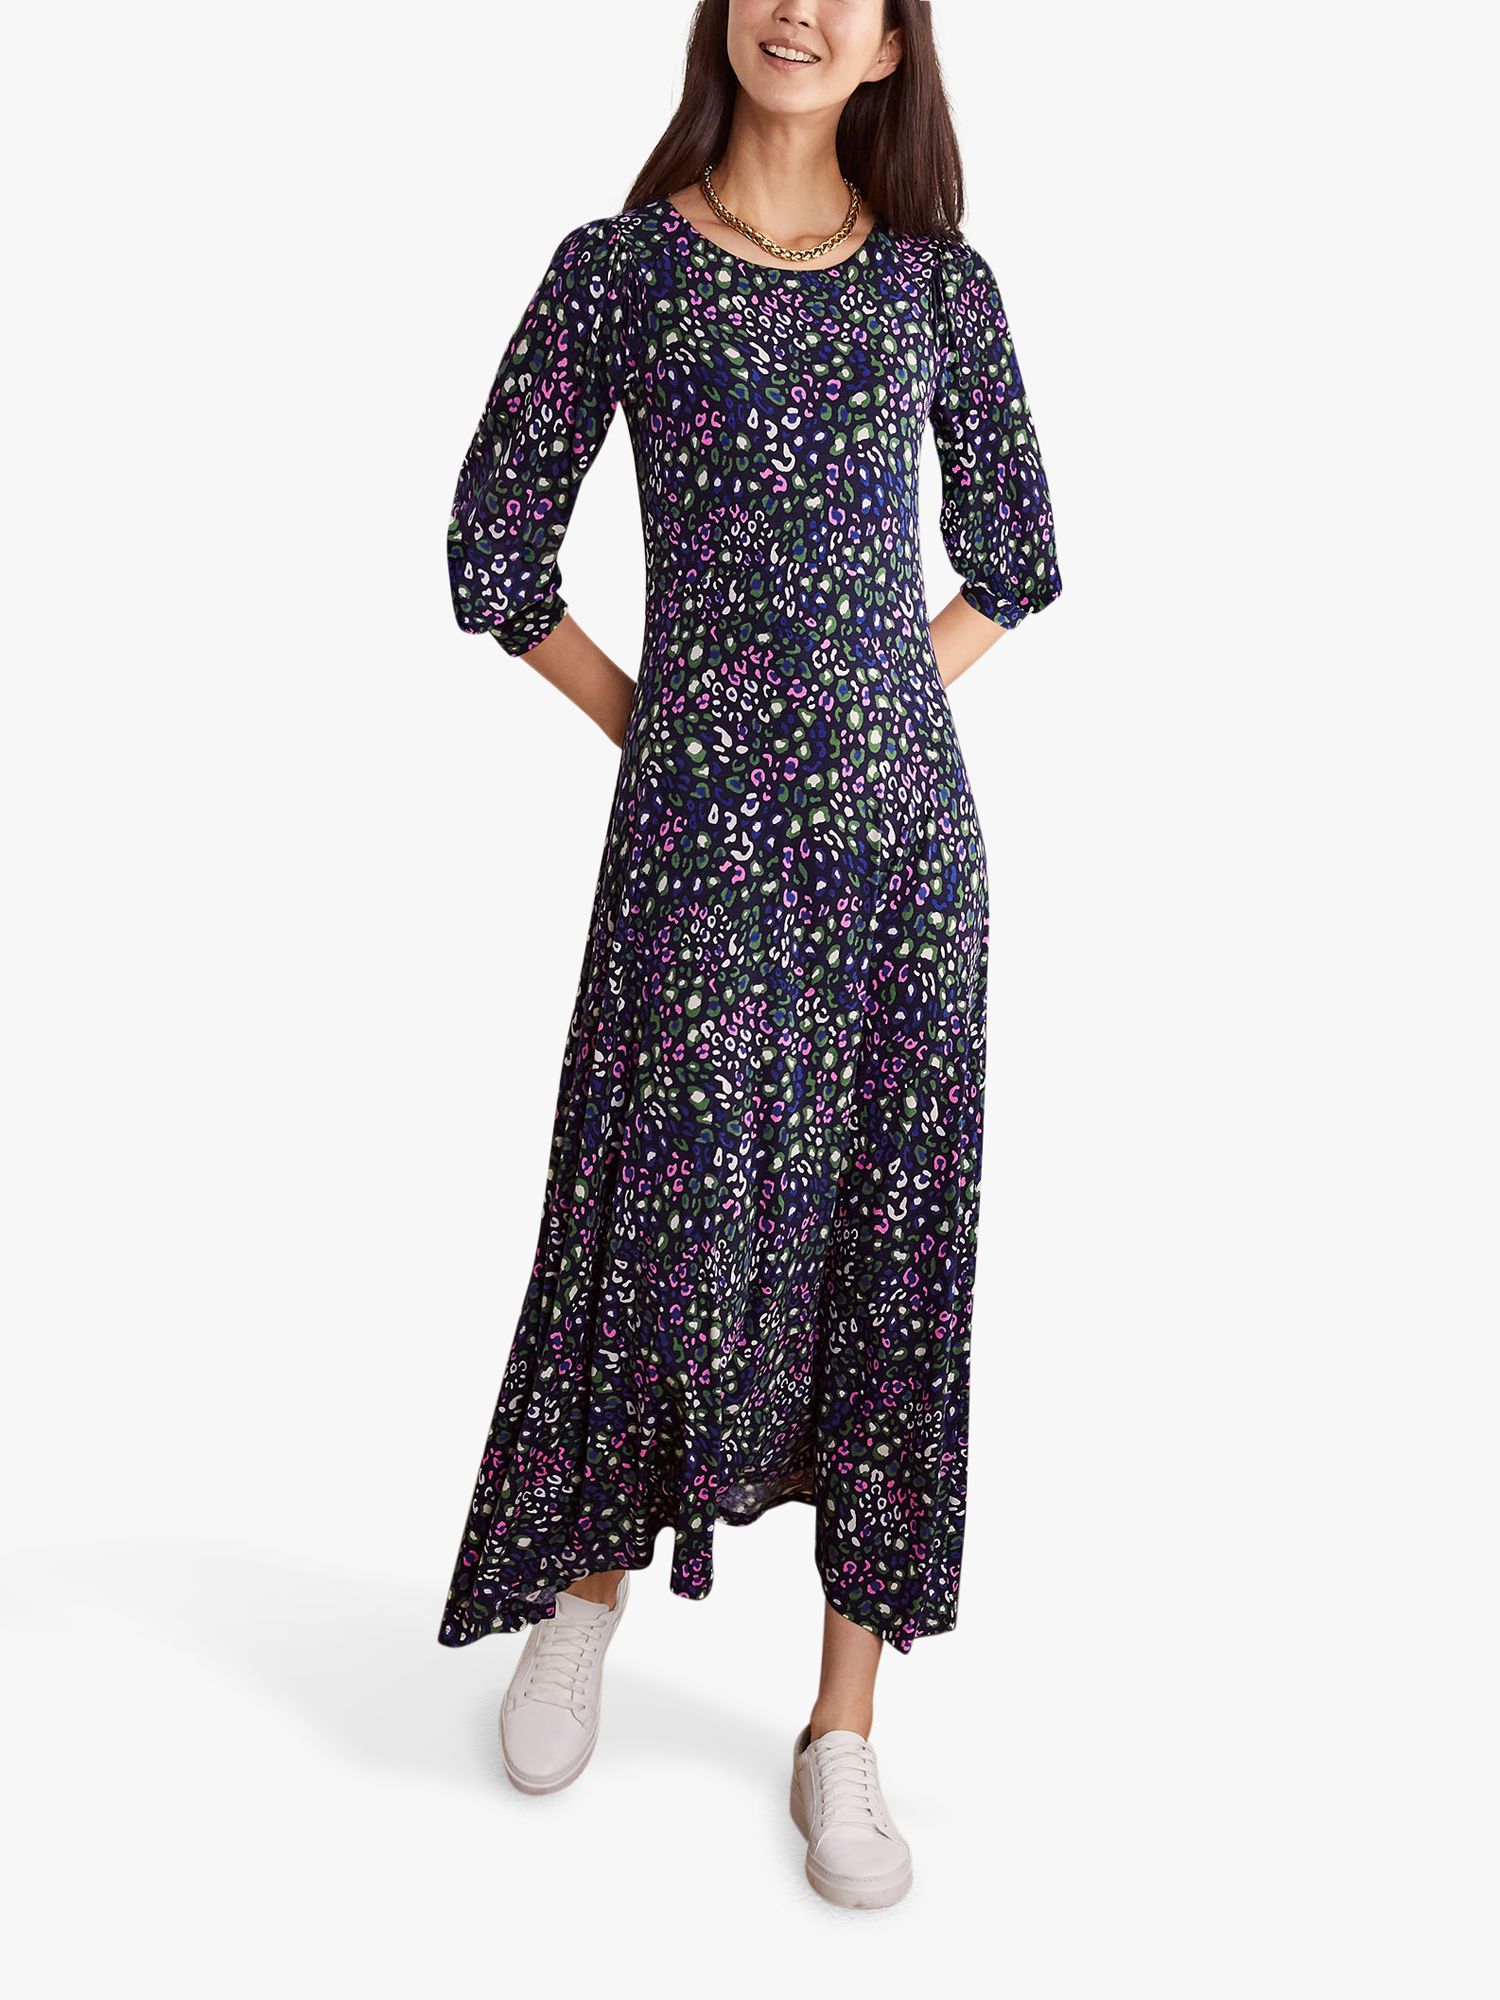 Boden Caitlin Abstract Maxi Dress at John Lewis & Partners